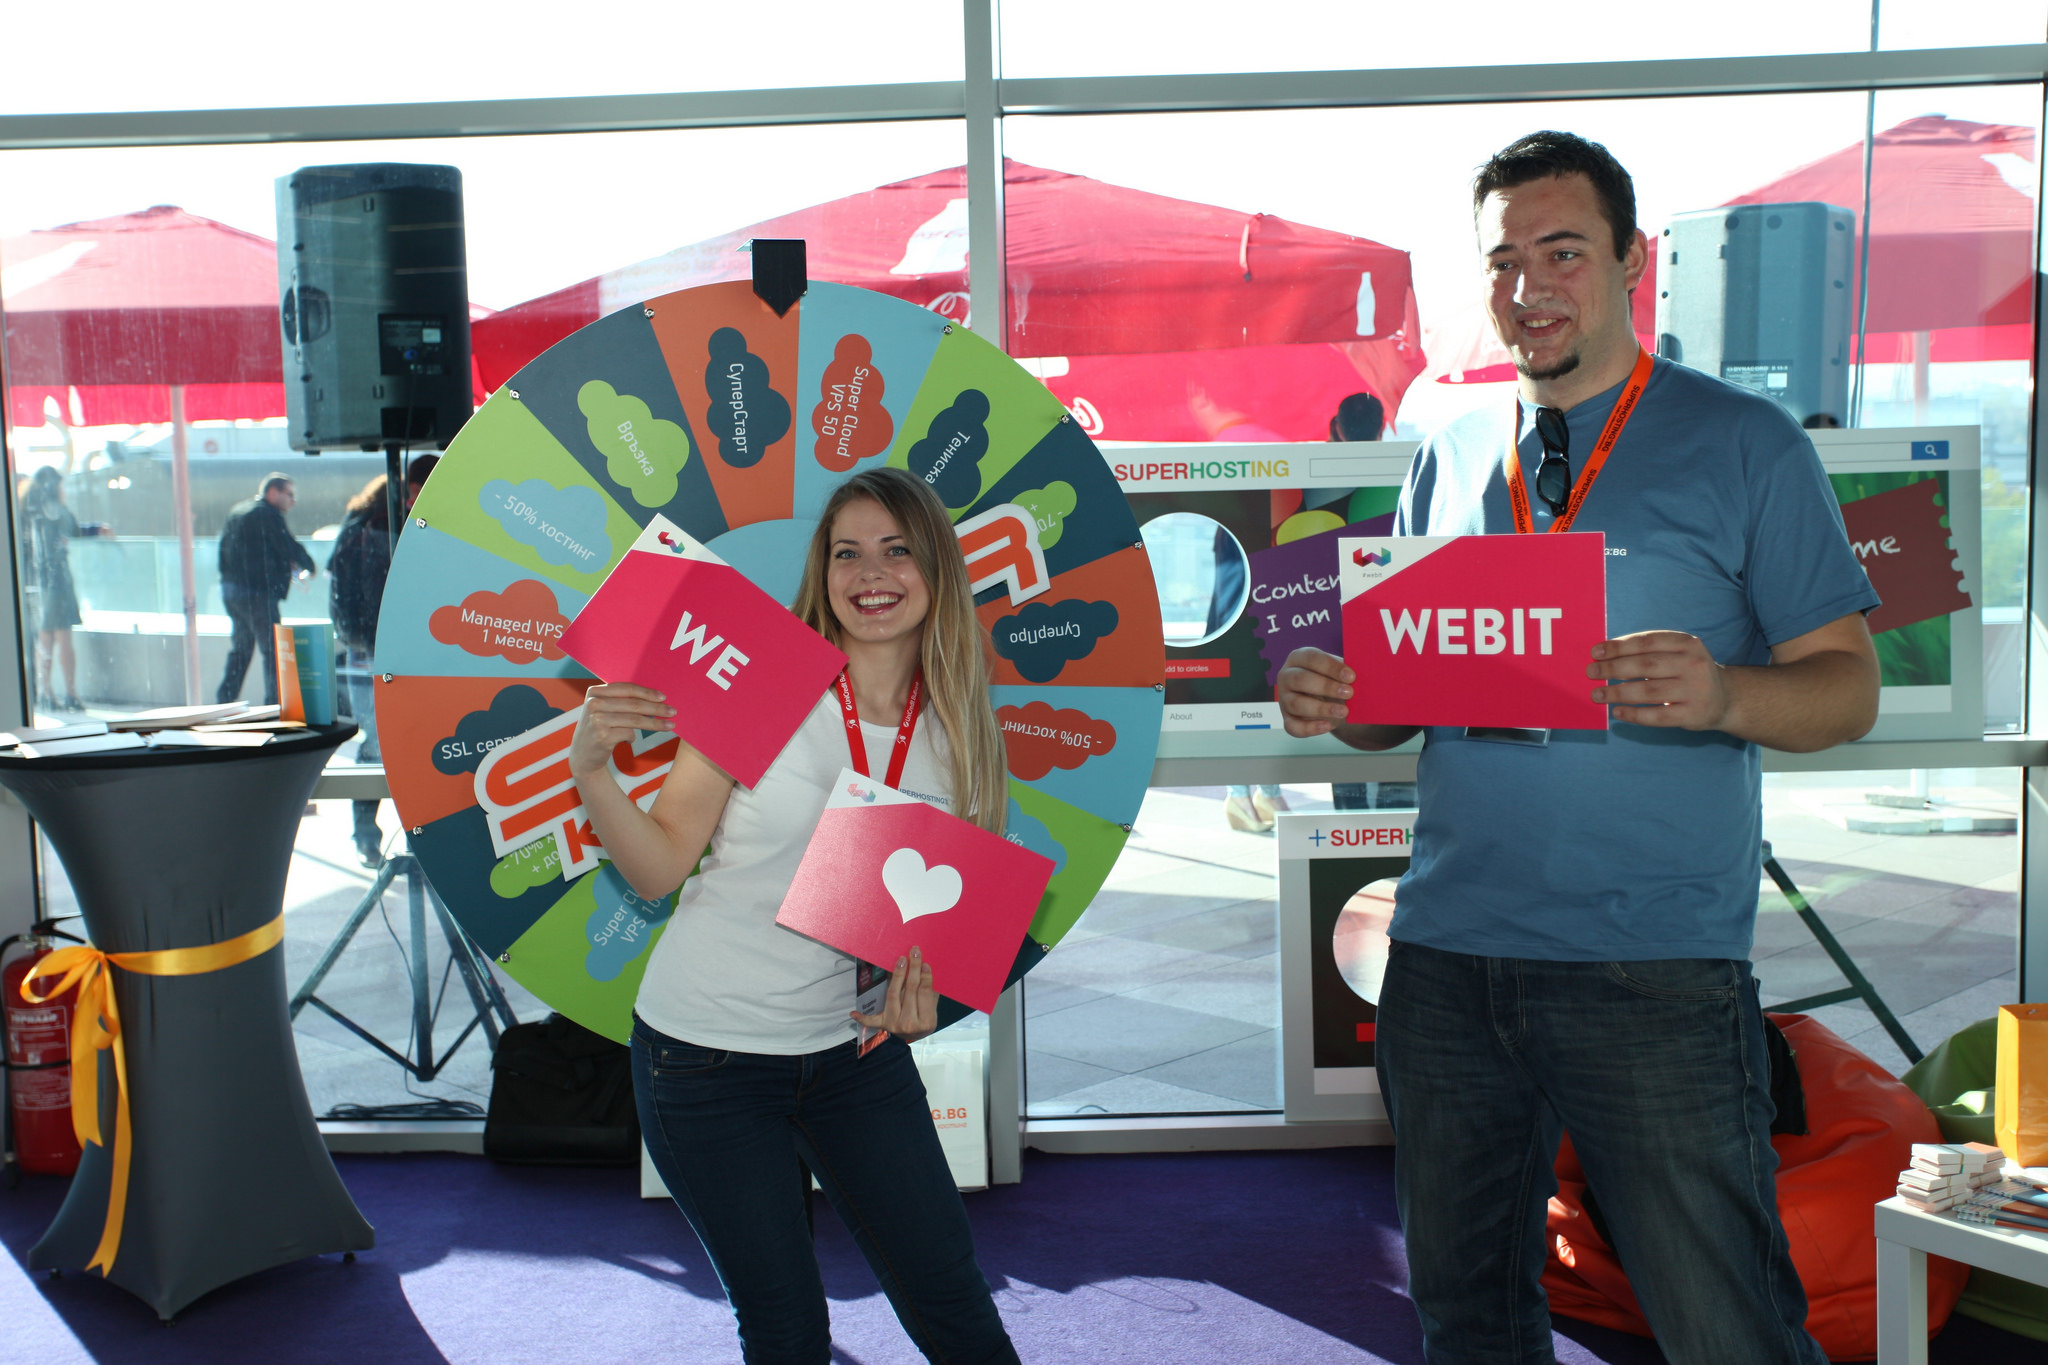 Webit, the future of technology showcased in Istanbul